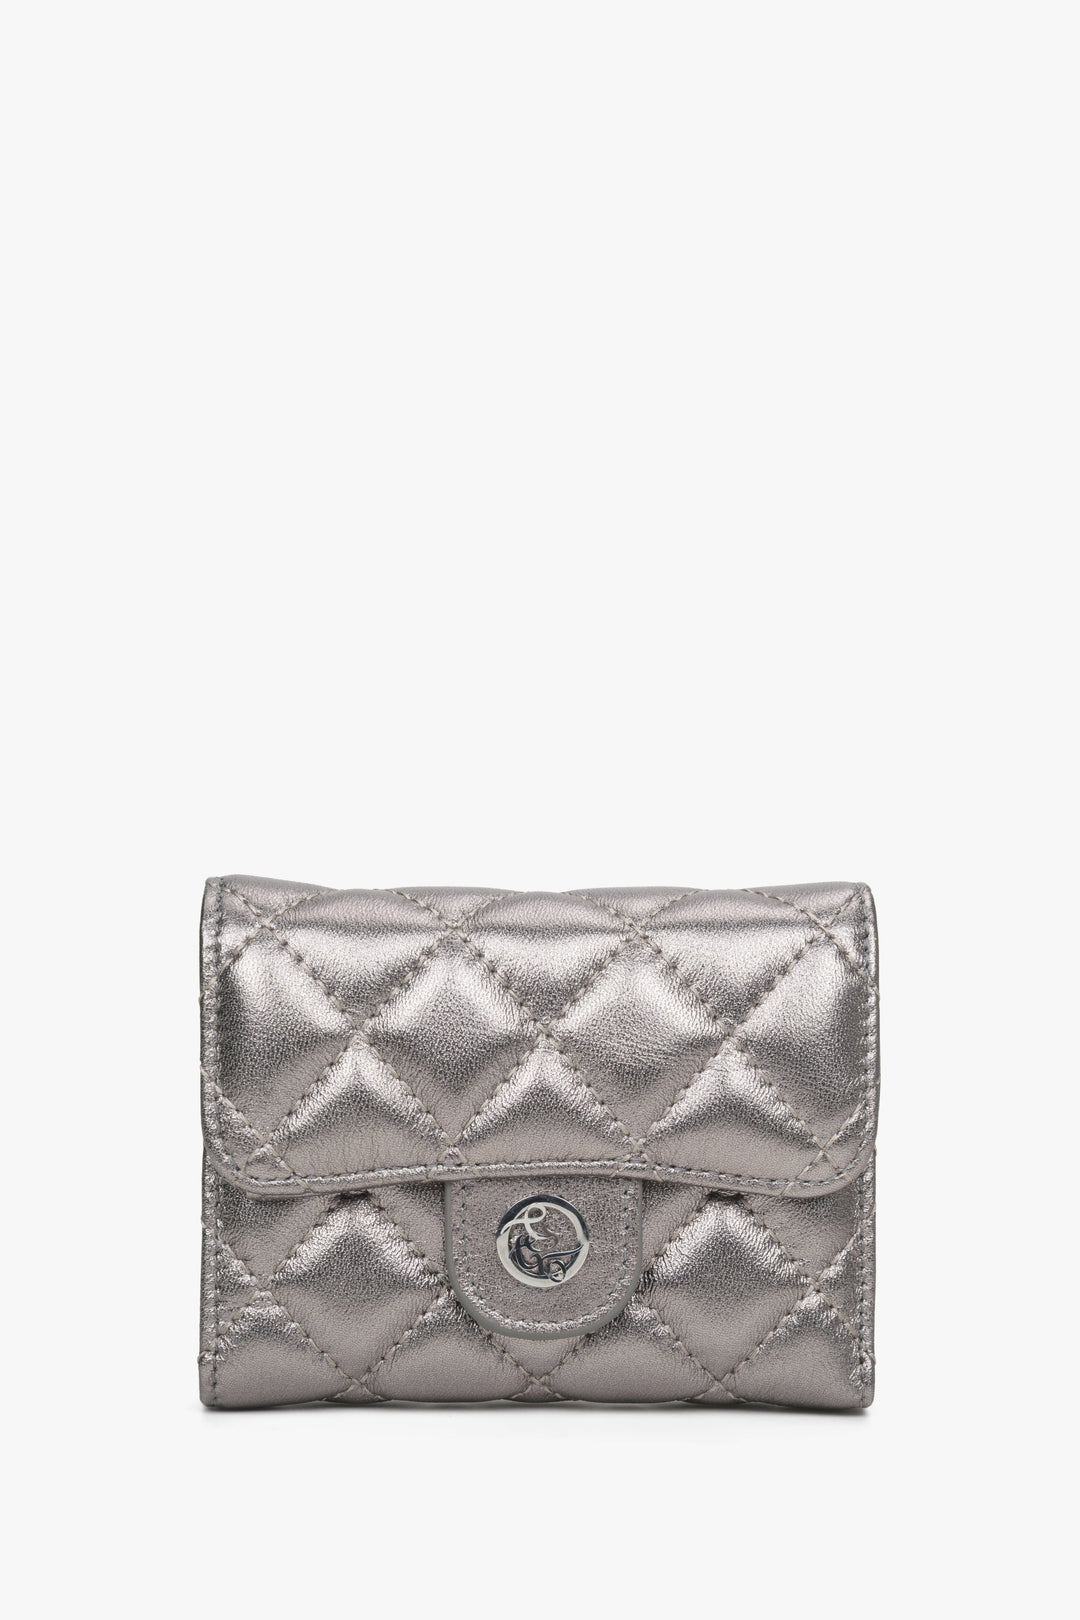 Women's Tri-Fold Small Silver Wallet with Decorative Embossing Estro ER00114476.